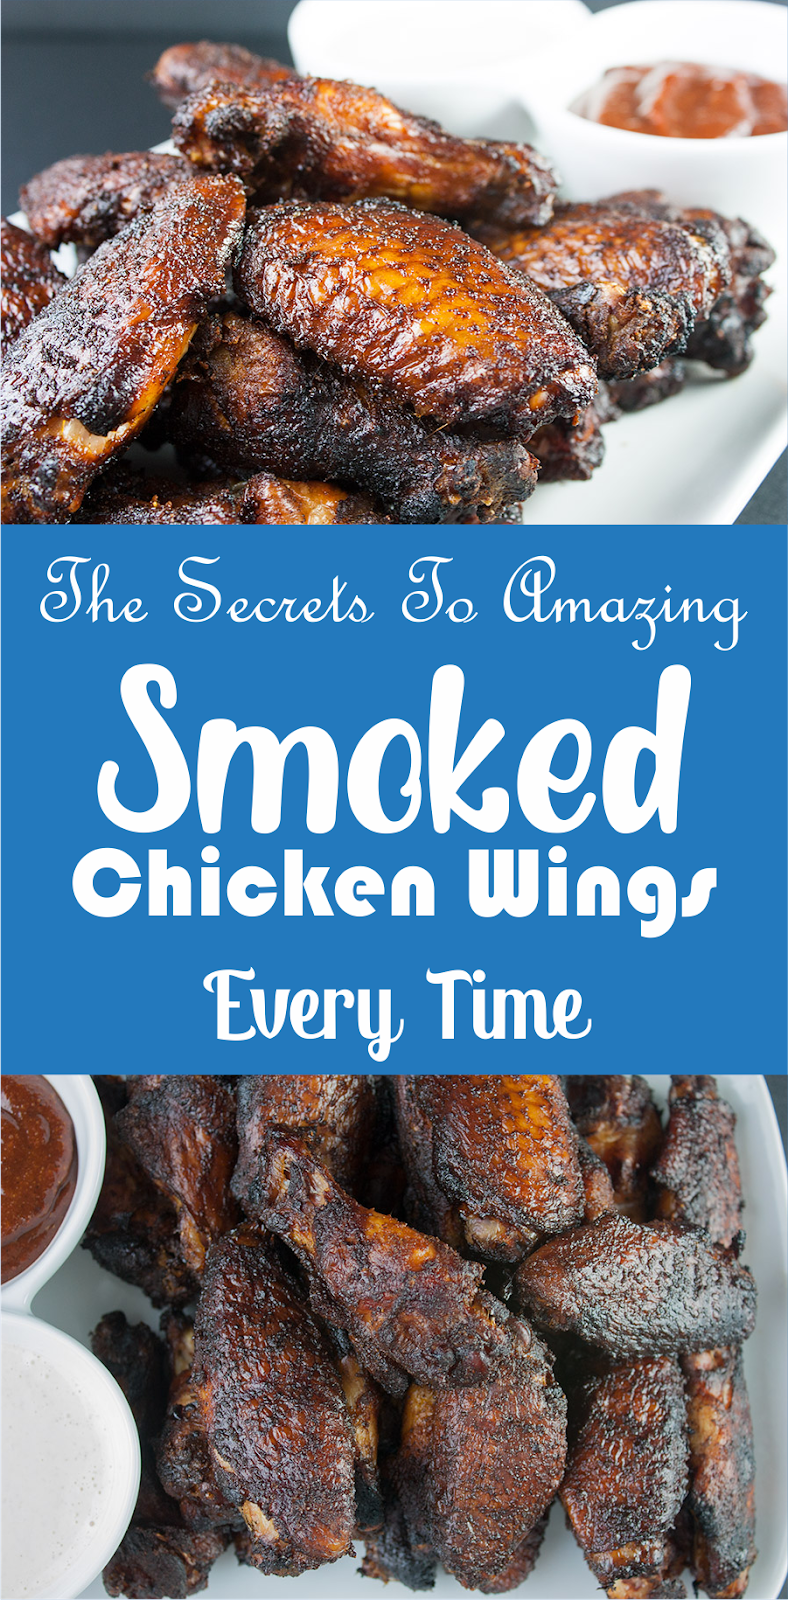 The Secrets To Amazing Smoked Chicken Wings Every Time | Latte Intero